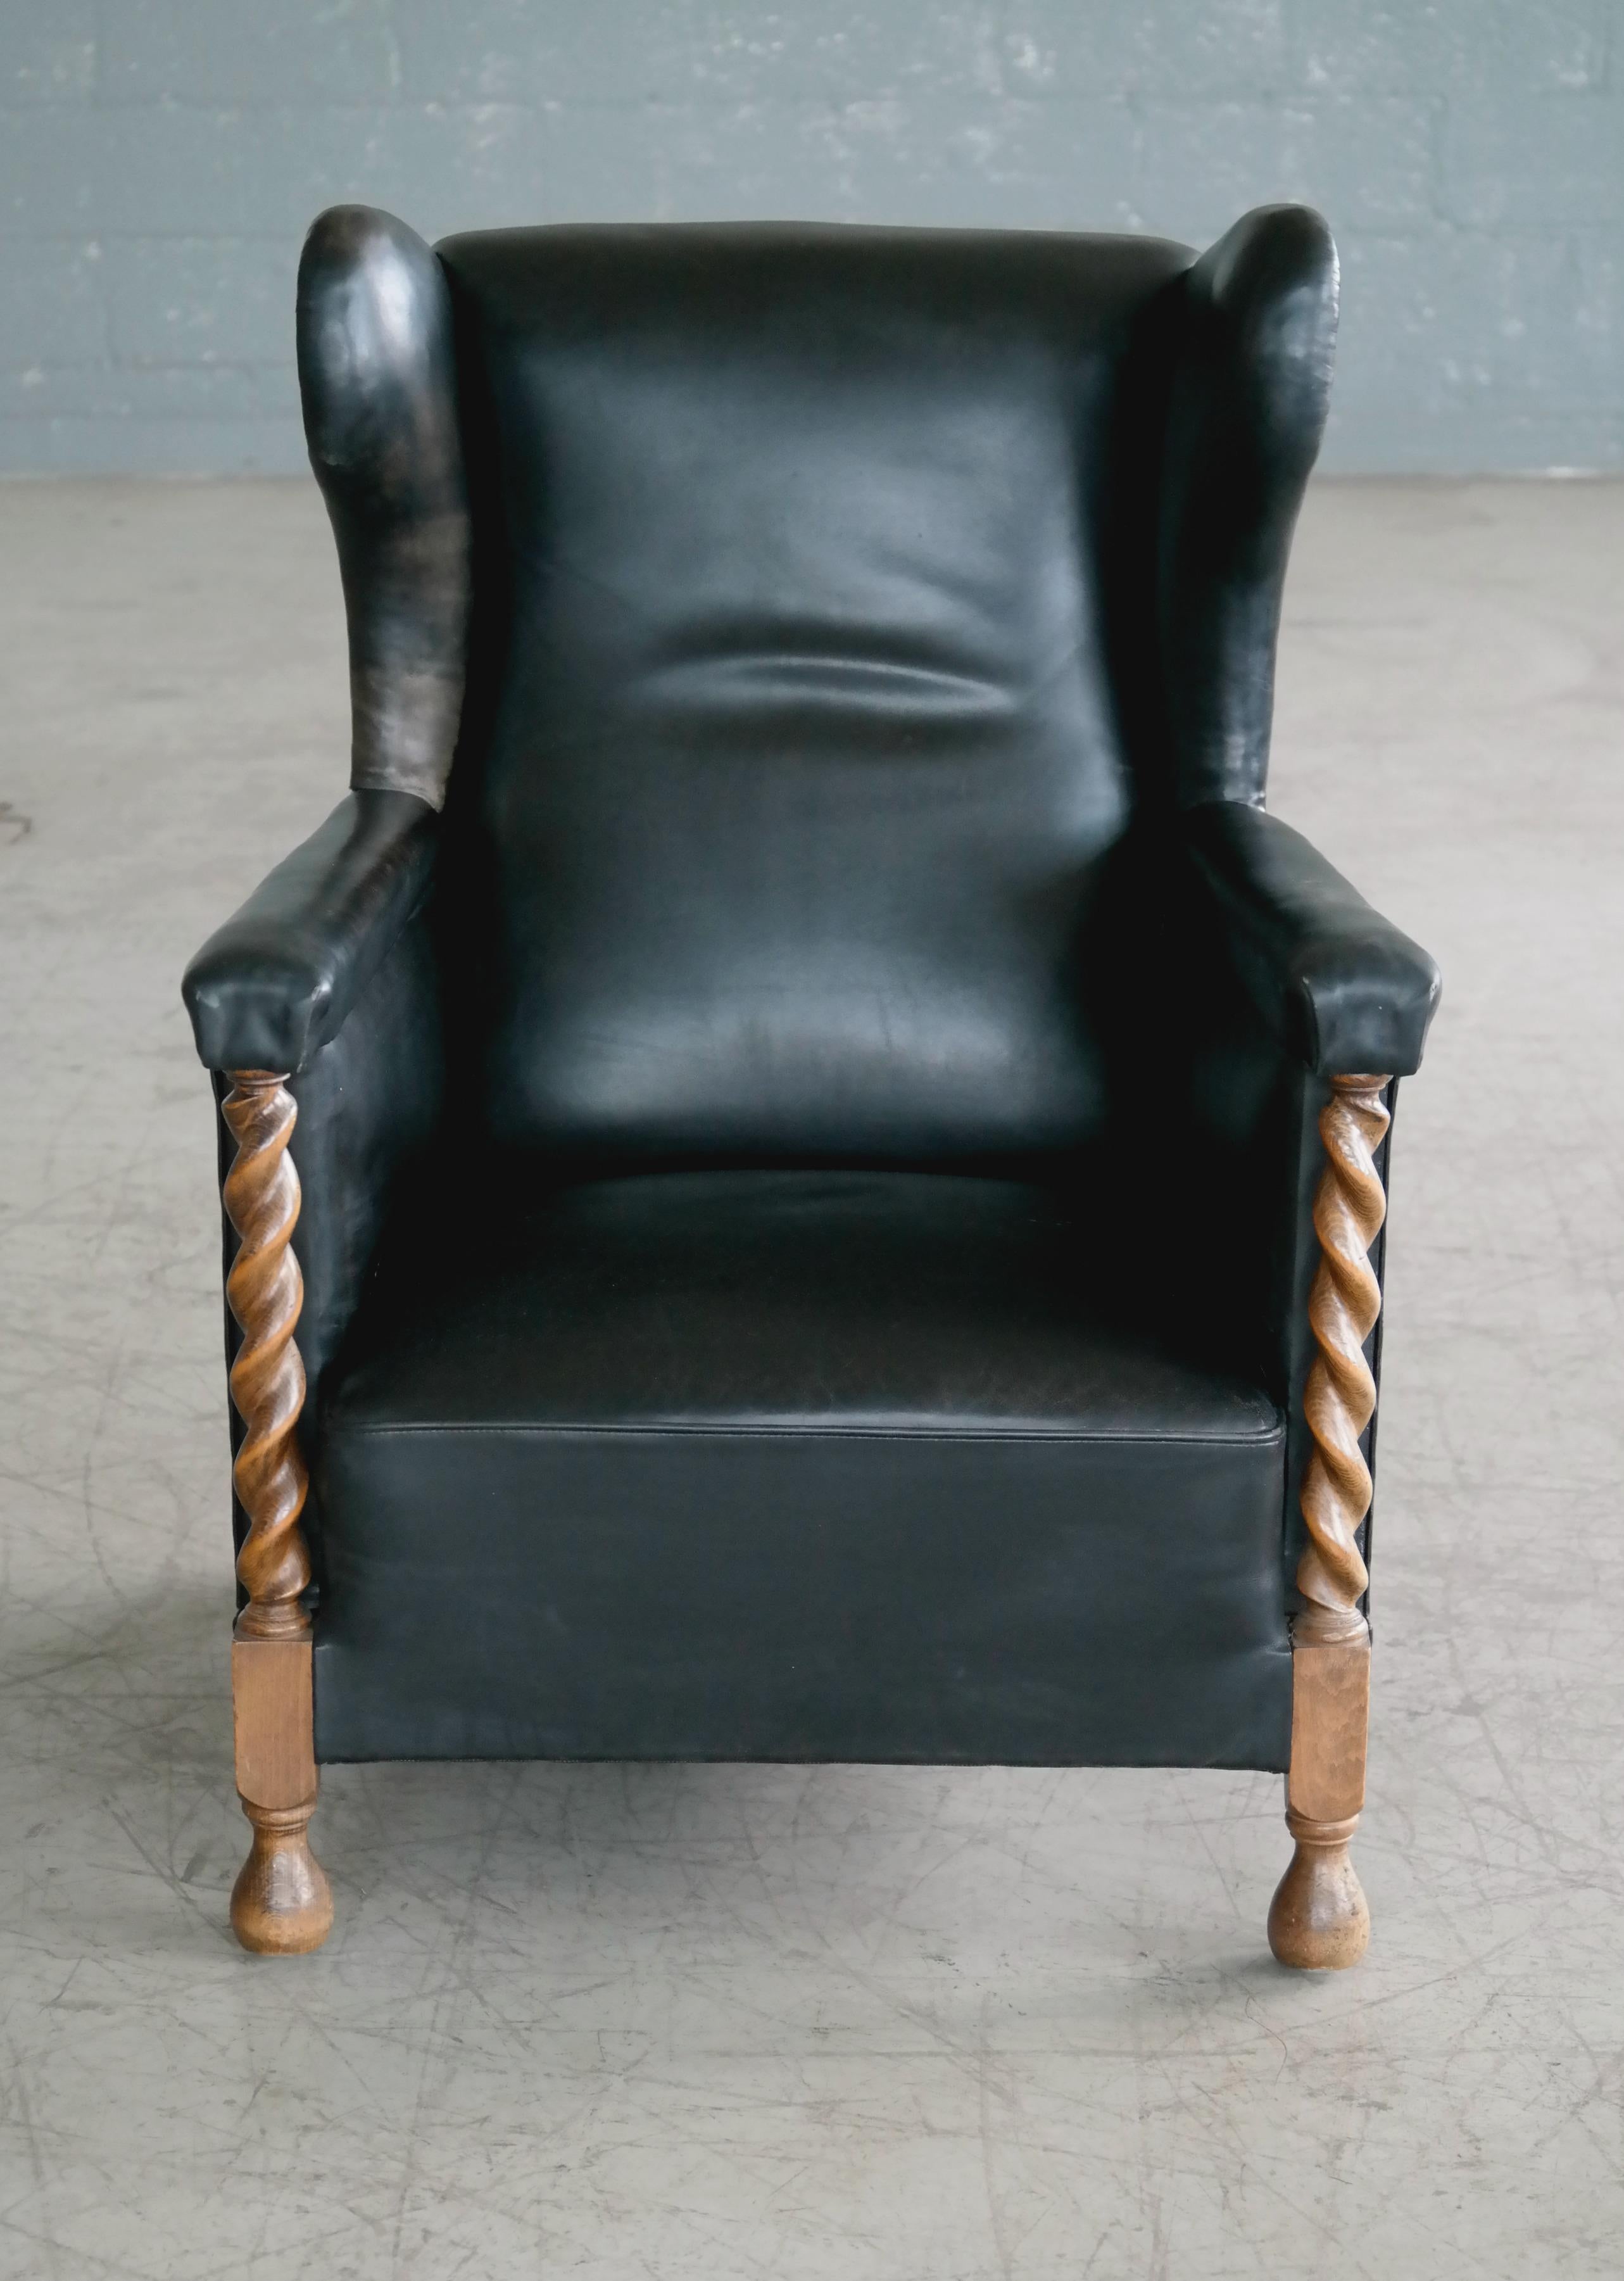 Rare and very cool Danish Large scale club chair from the post Art Deco period of the mid to late 1930s. Fantastic patinated original black leather with hand carved uprights and front legs carved in solid oak. The use of solid oak is a good